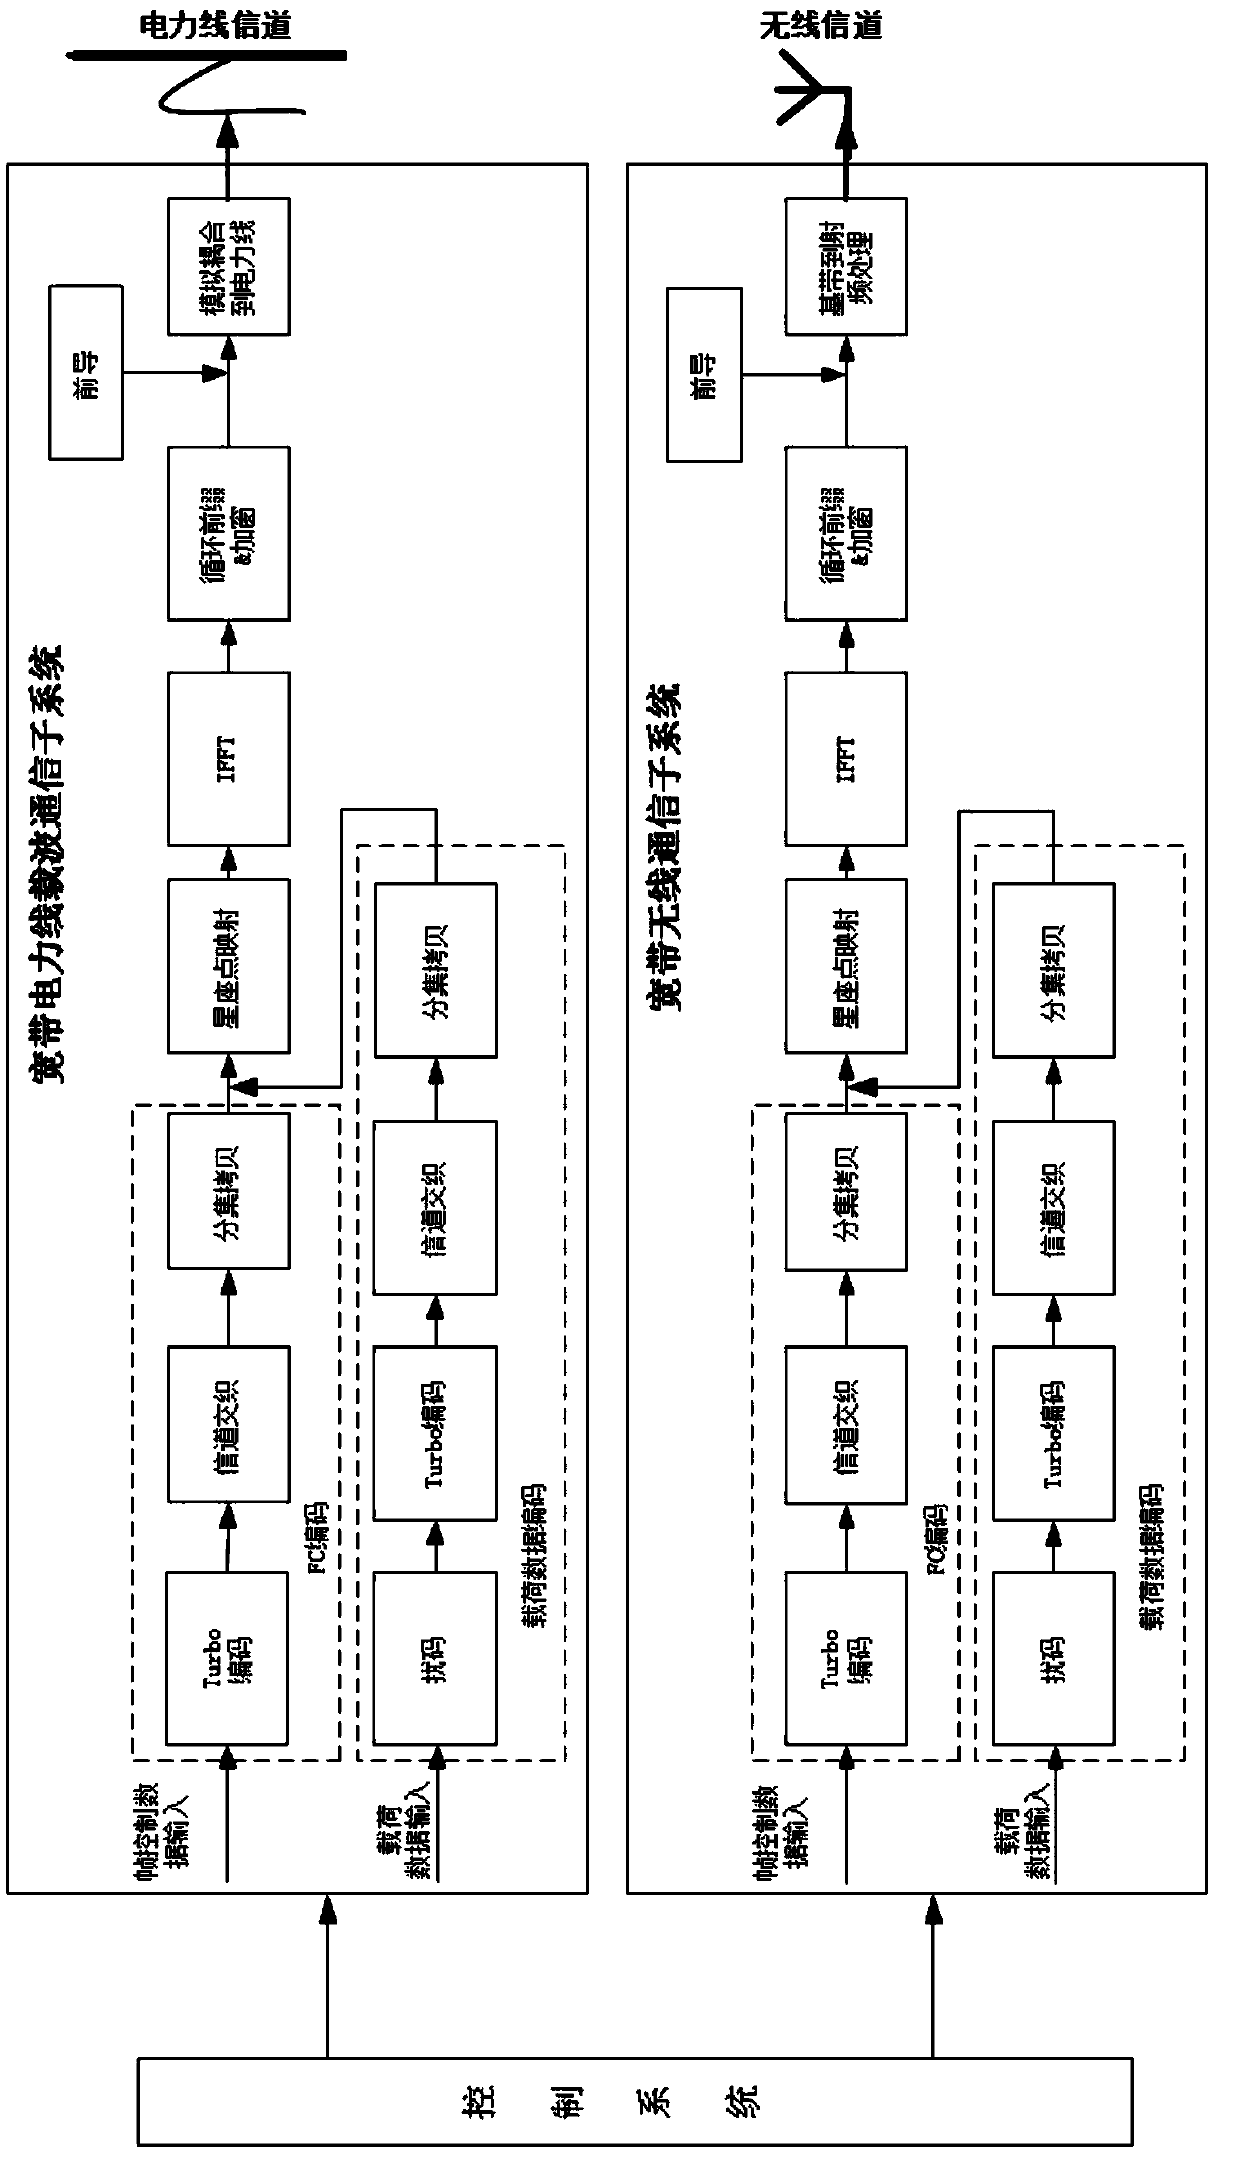 Broadband power line carrier and broadband wireless dual-mode communication system based on same OFDM system